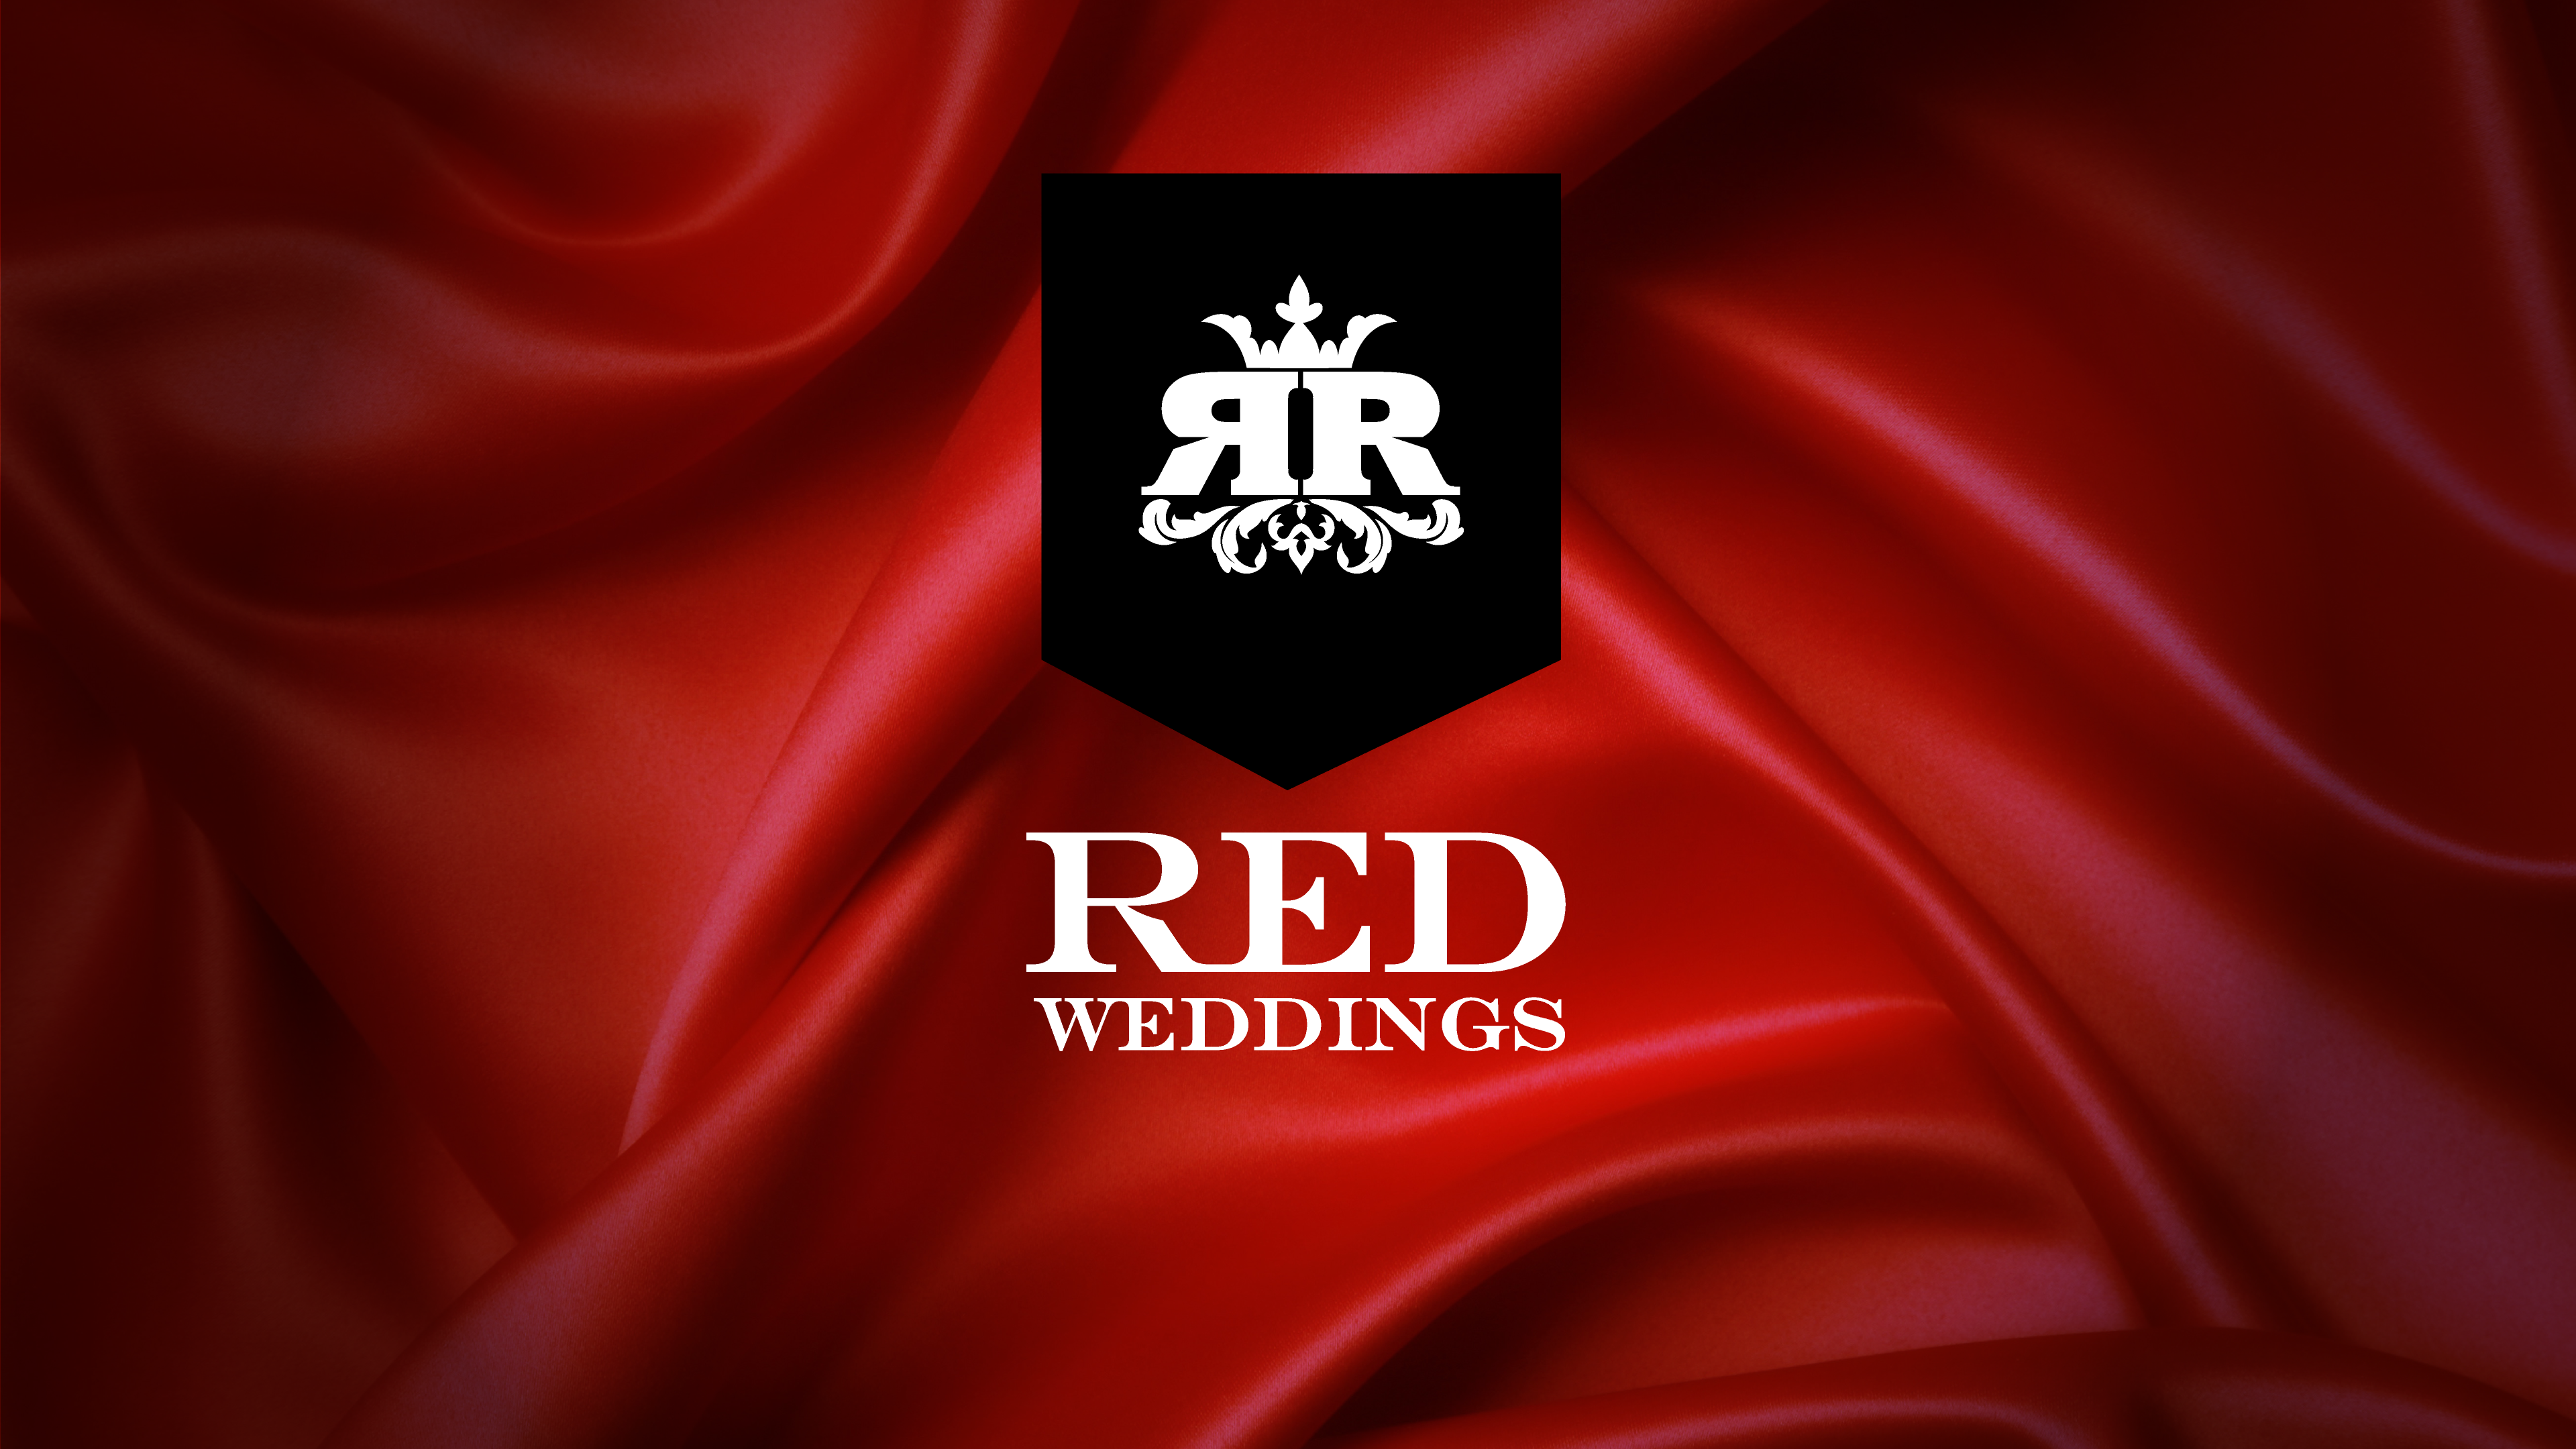 Premium Wedding photography videography drone & DJ services – RED Weddings – Chicago / Worldwide